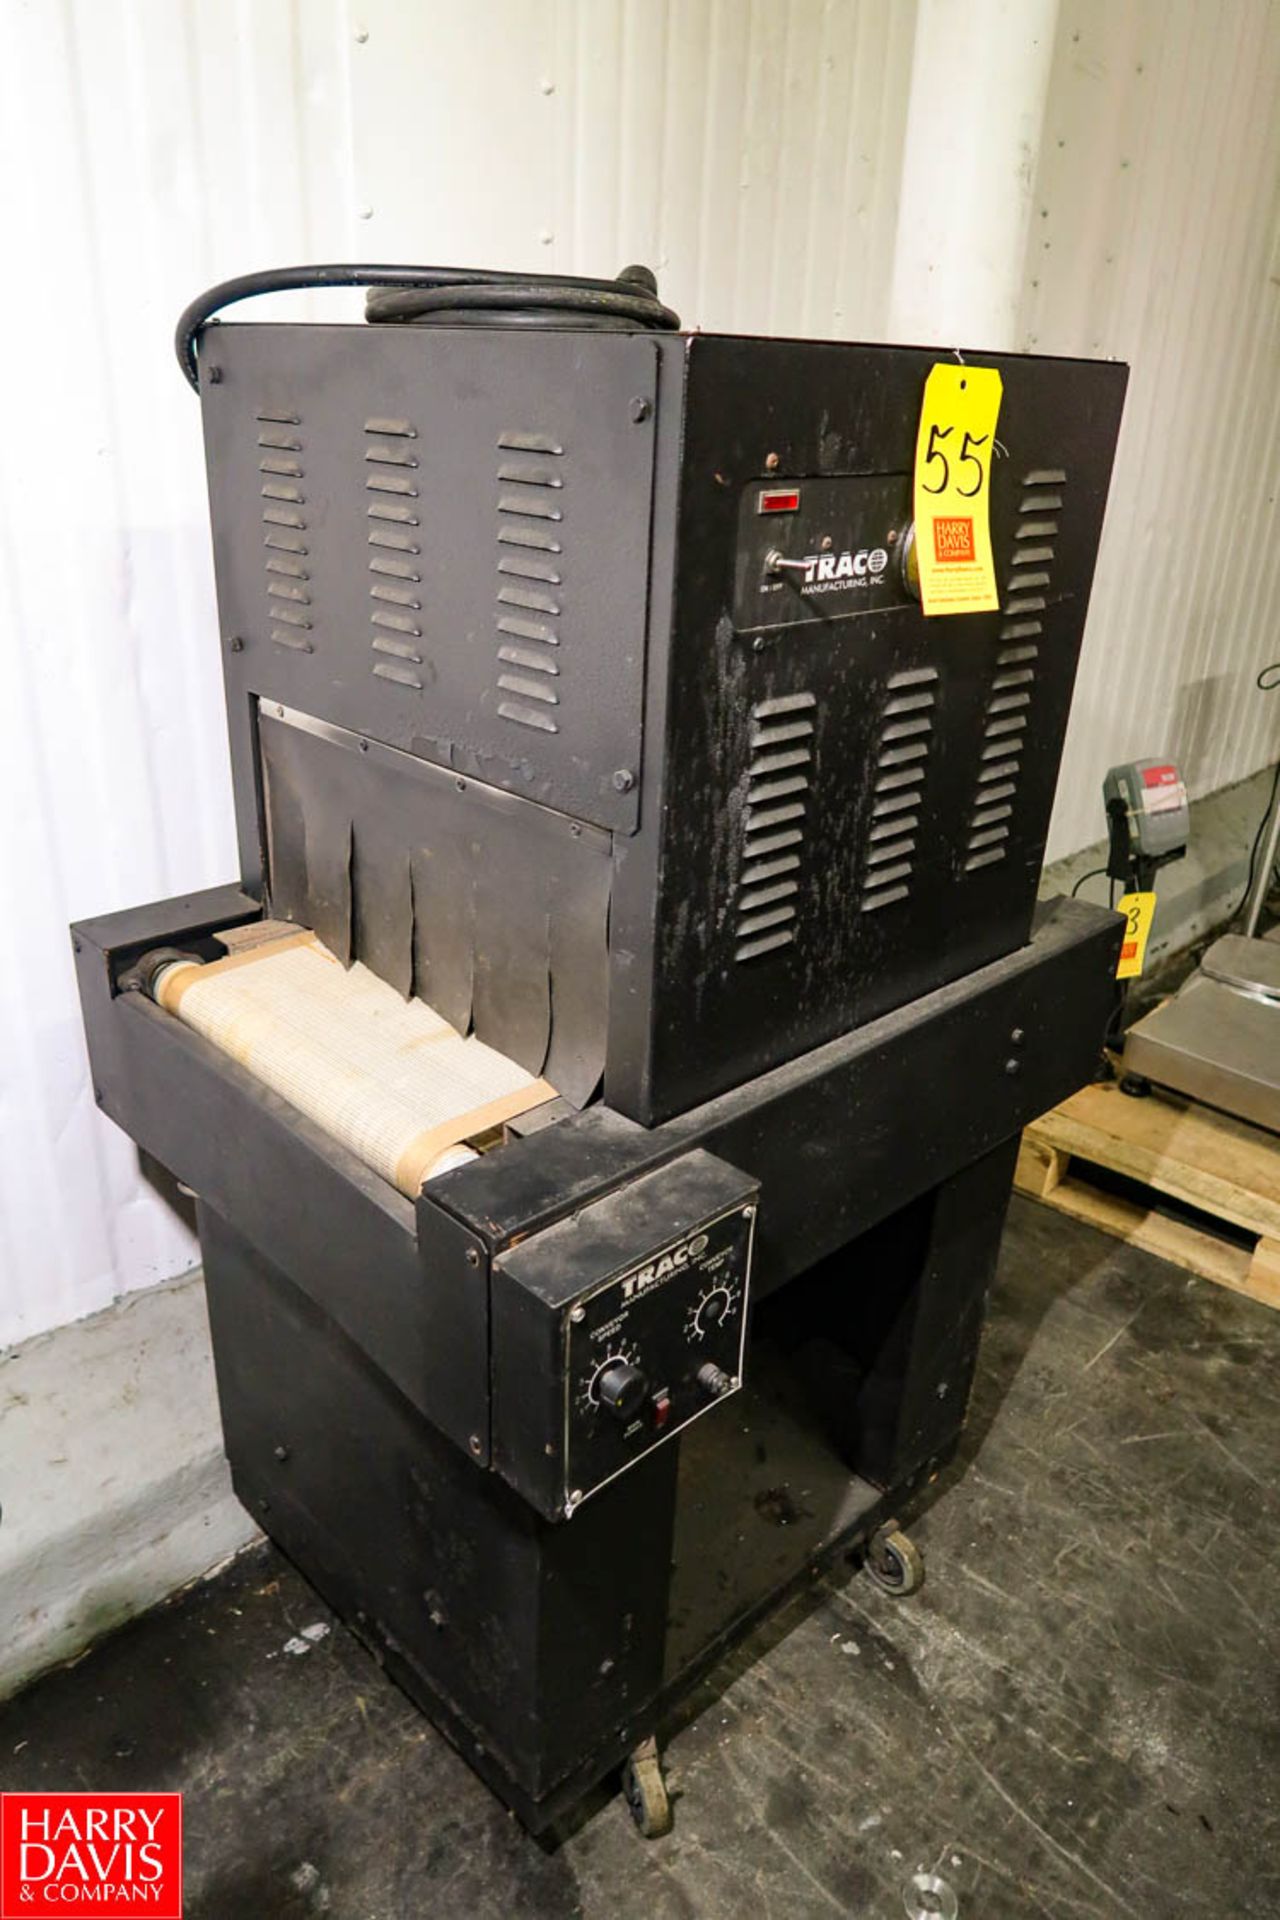 2006 Traco Manufacturing Heat Shrink Tunnel Model: 800T S/N: 5166, 15" x 20" x 7" (WxLxH) Tunnel,